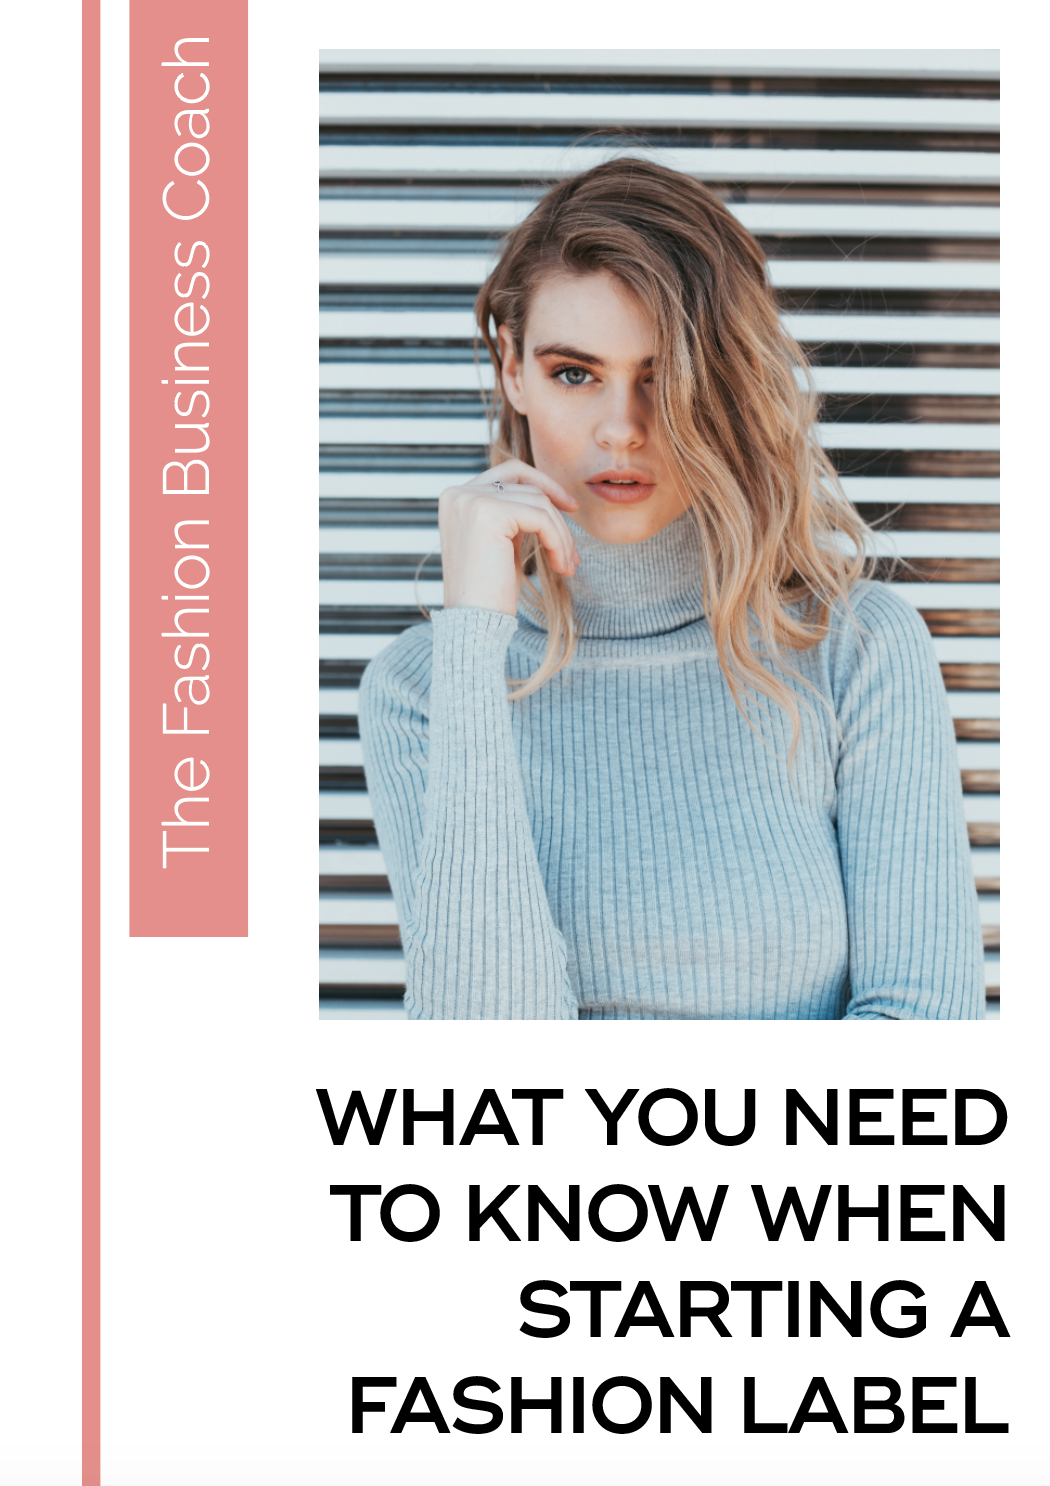 What You Need to Know When Starting a Fashion Label 1.png